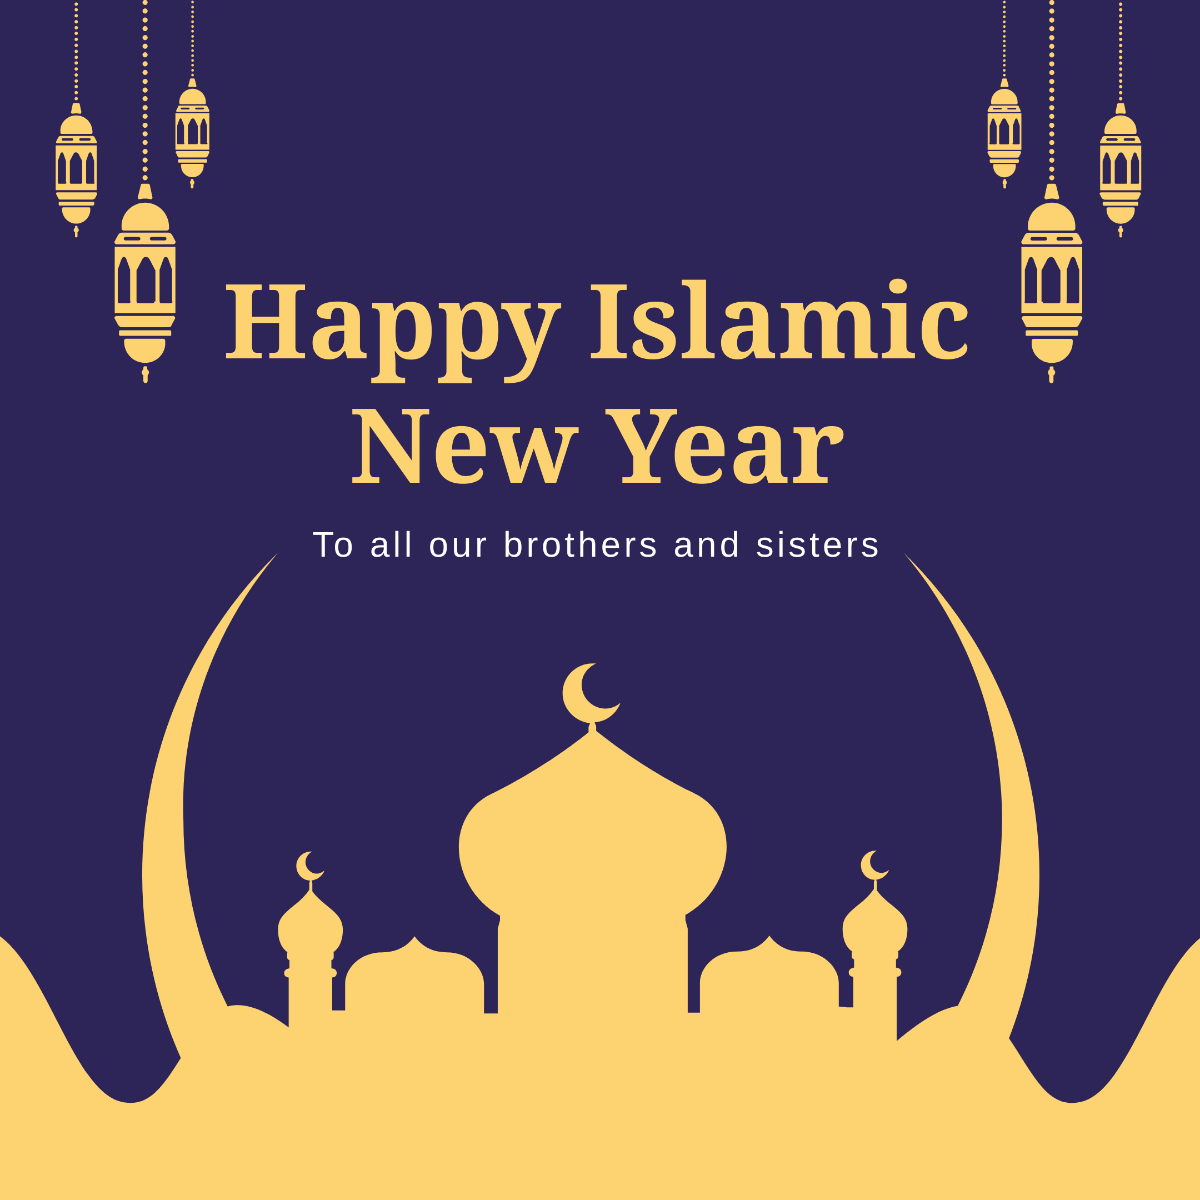 Free Islamic New Year Instagram Post Template